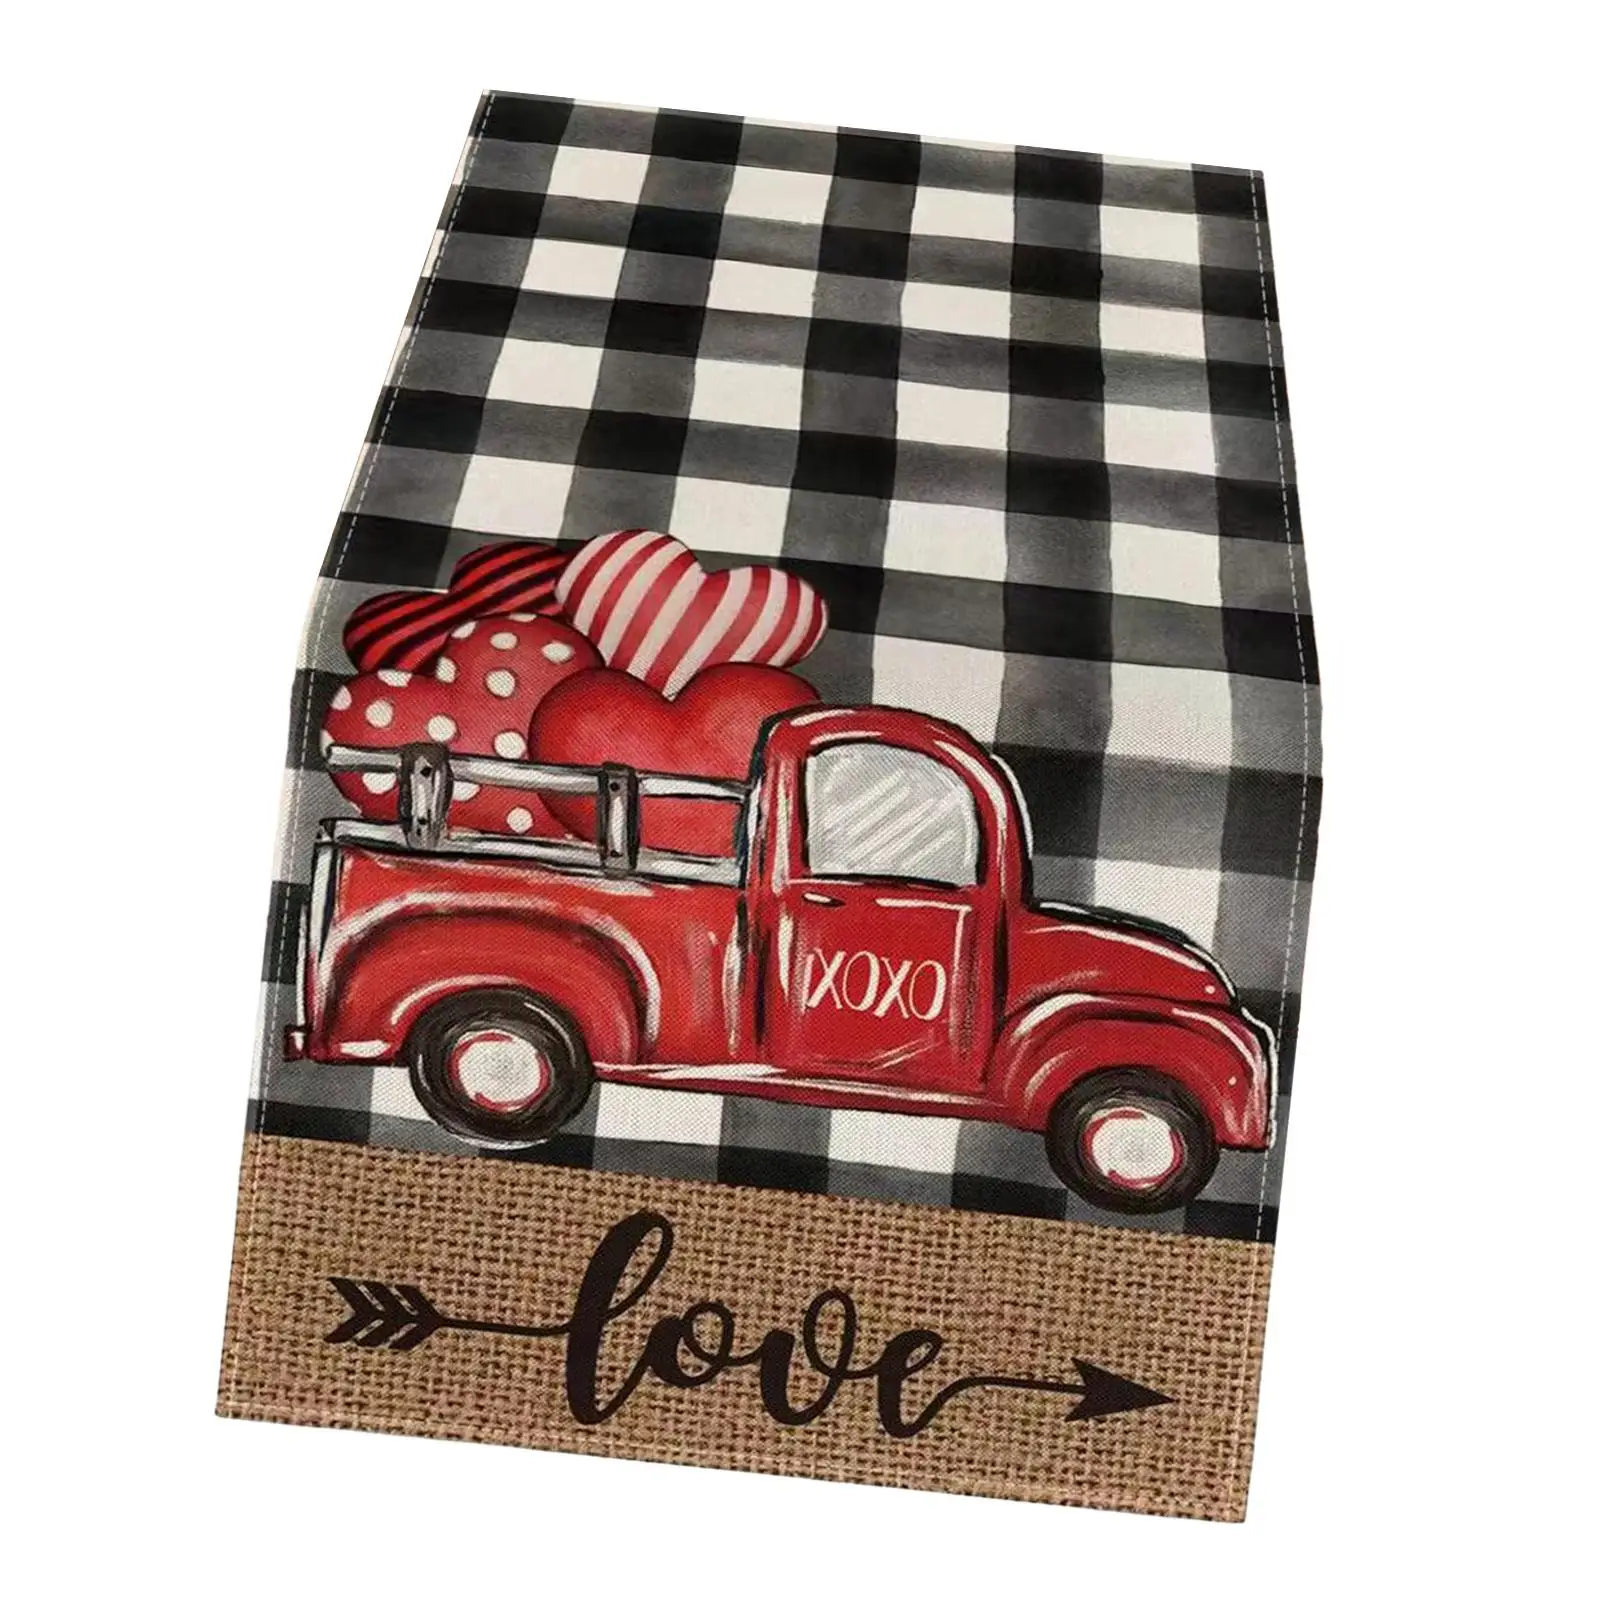 Valentine`s Day Table Runner 13x72 inch Washable Dining Table Decoration Table Cloth for Kitchen Restaurant Desk Cafe Home Decor